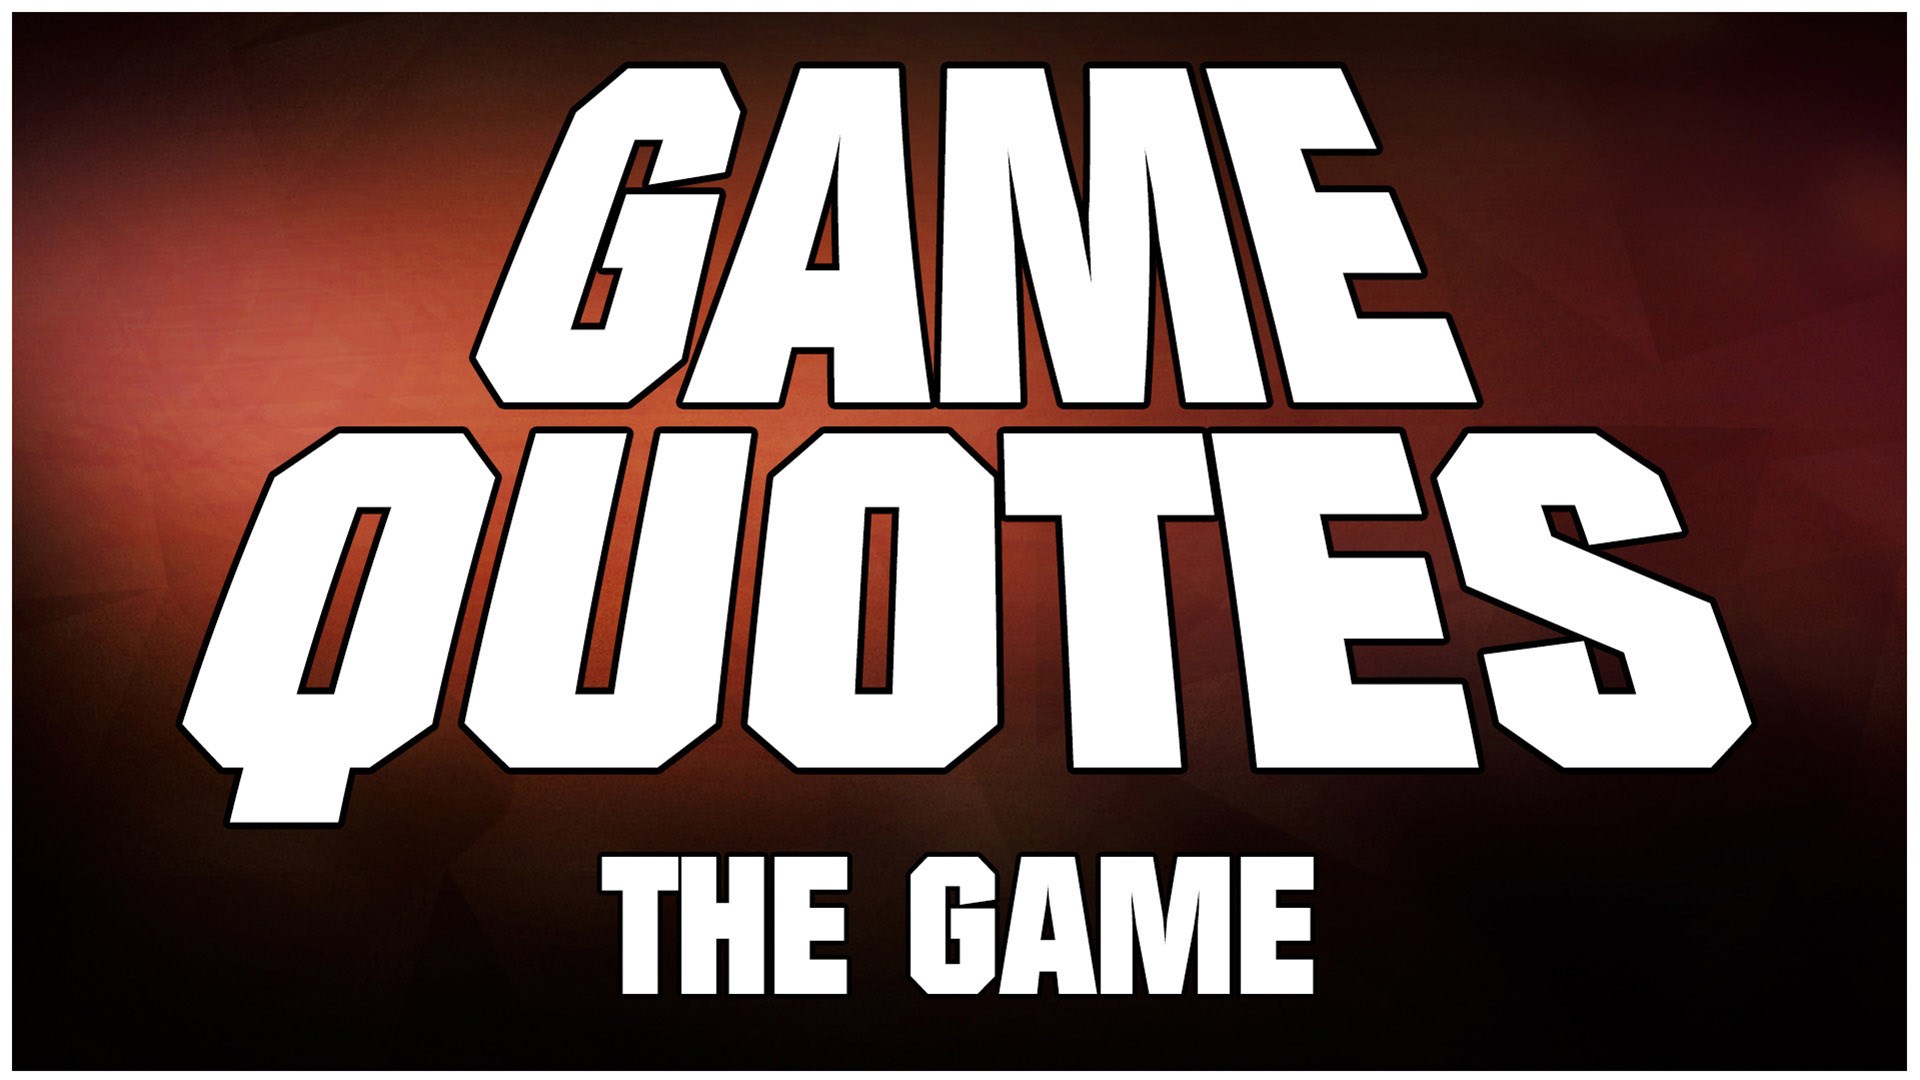 Game quotes. You can buy the game